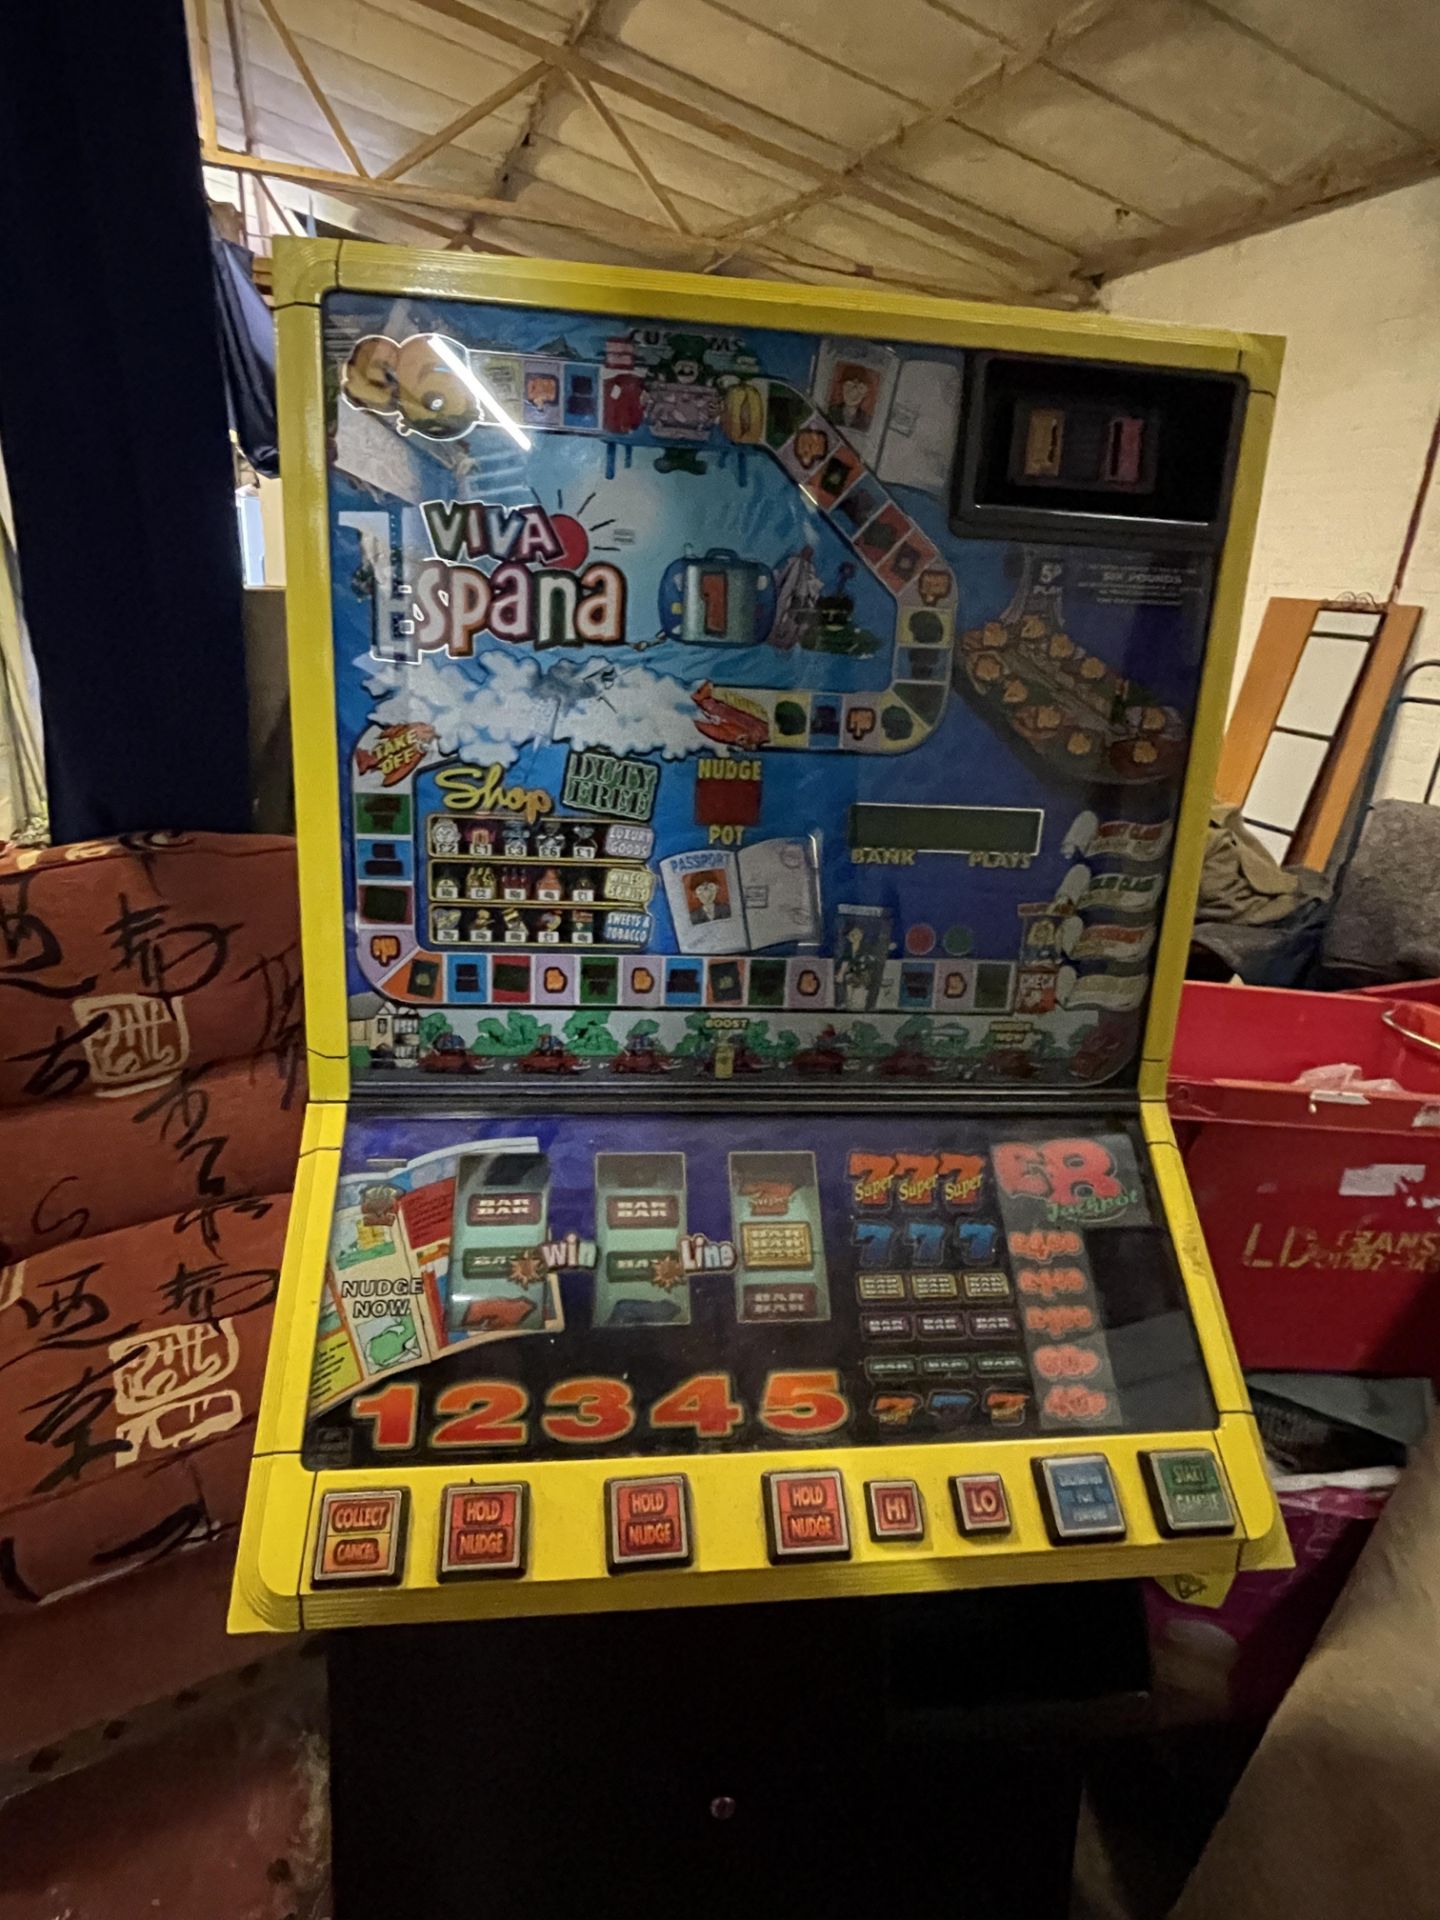 gaming machine lost property un claimed anmusment amusement